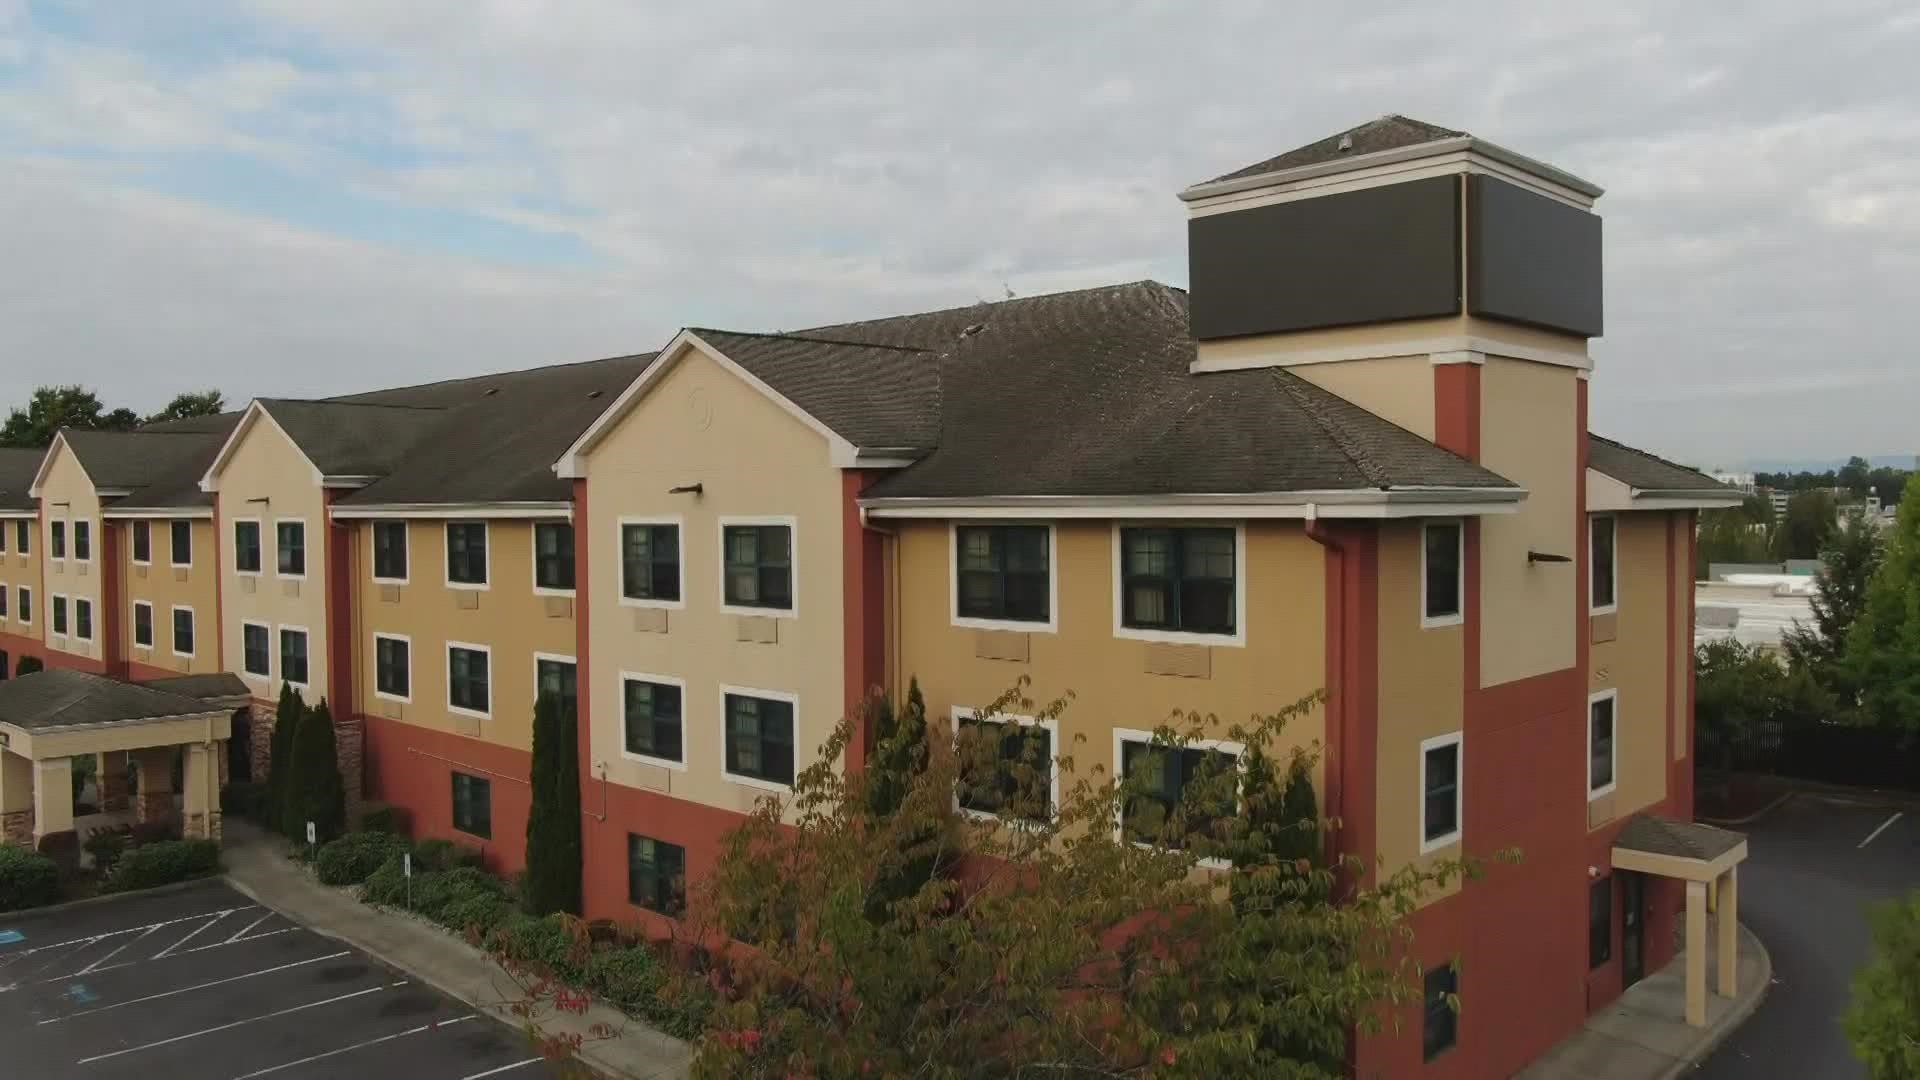 Federal Way Mayor Jim Ferrell said King County is preparing to temporarily house Afghan refugees in a former hotel the county owns.